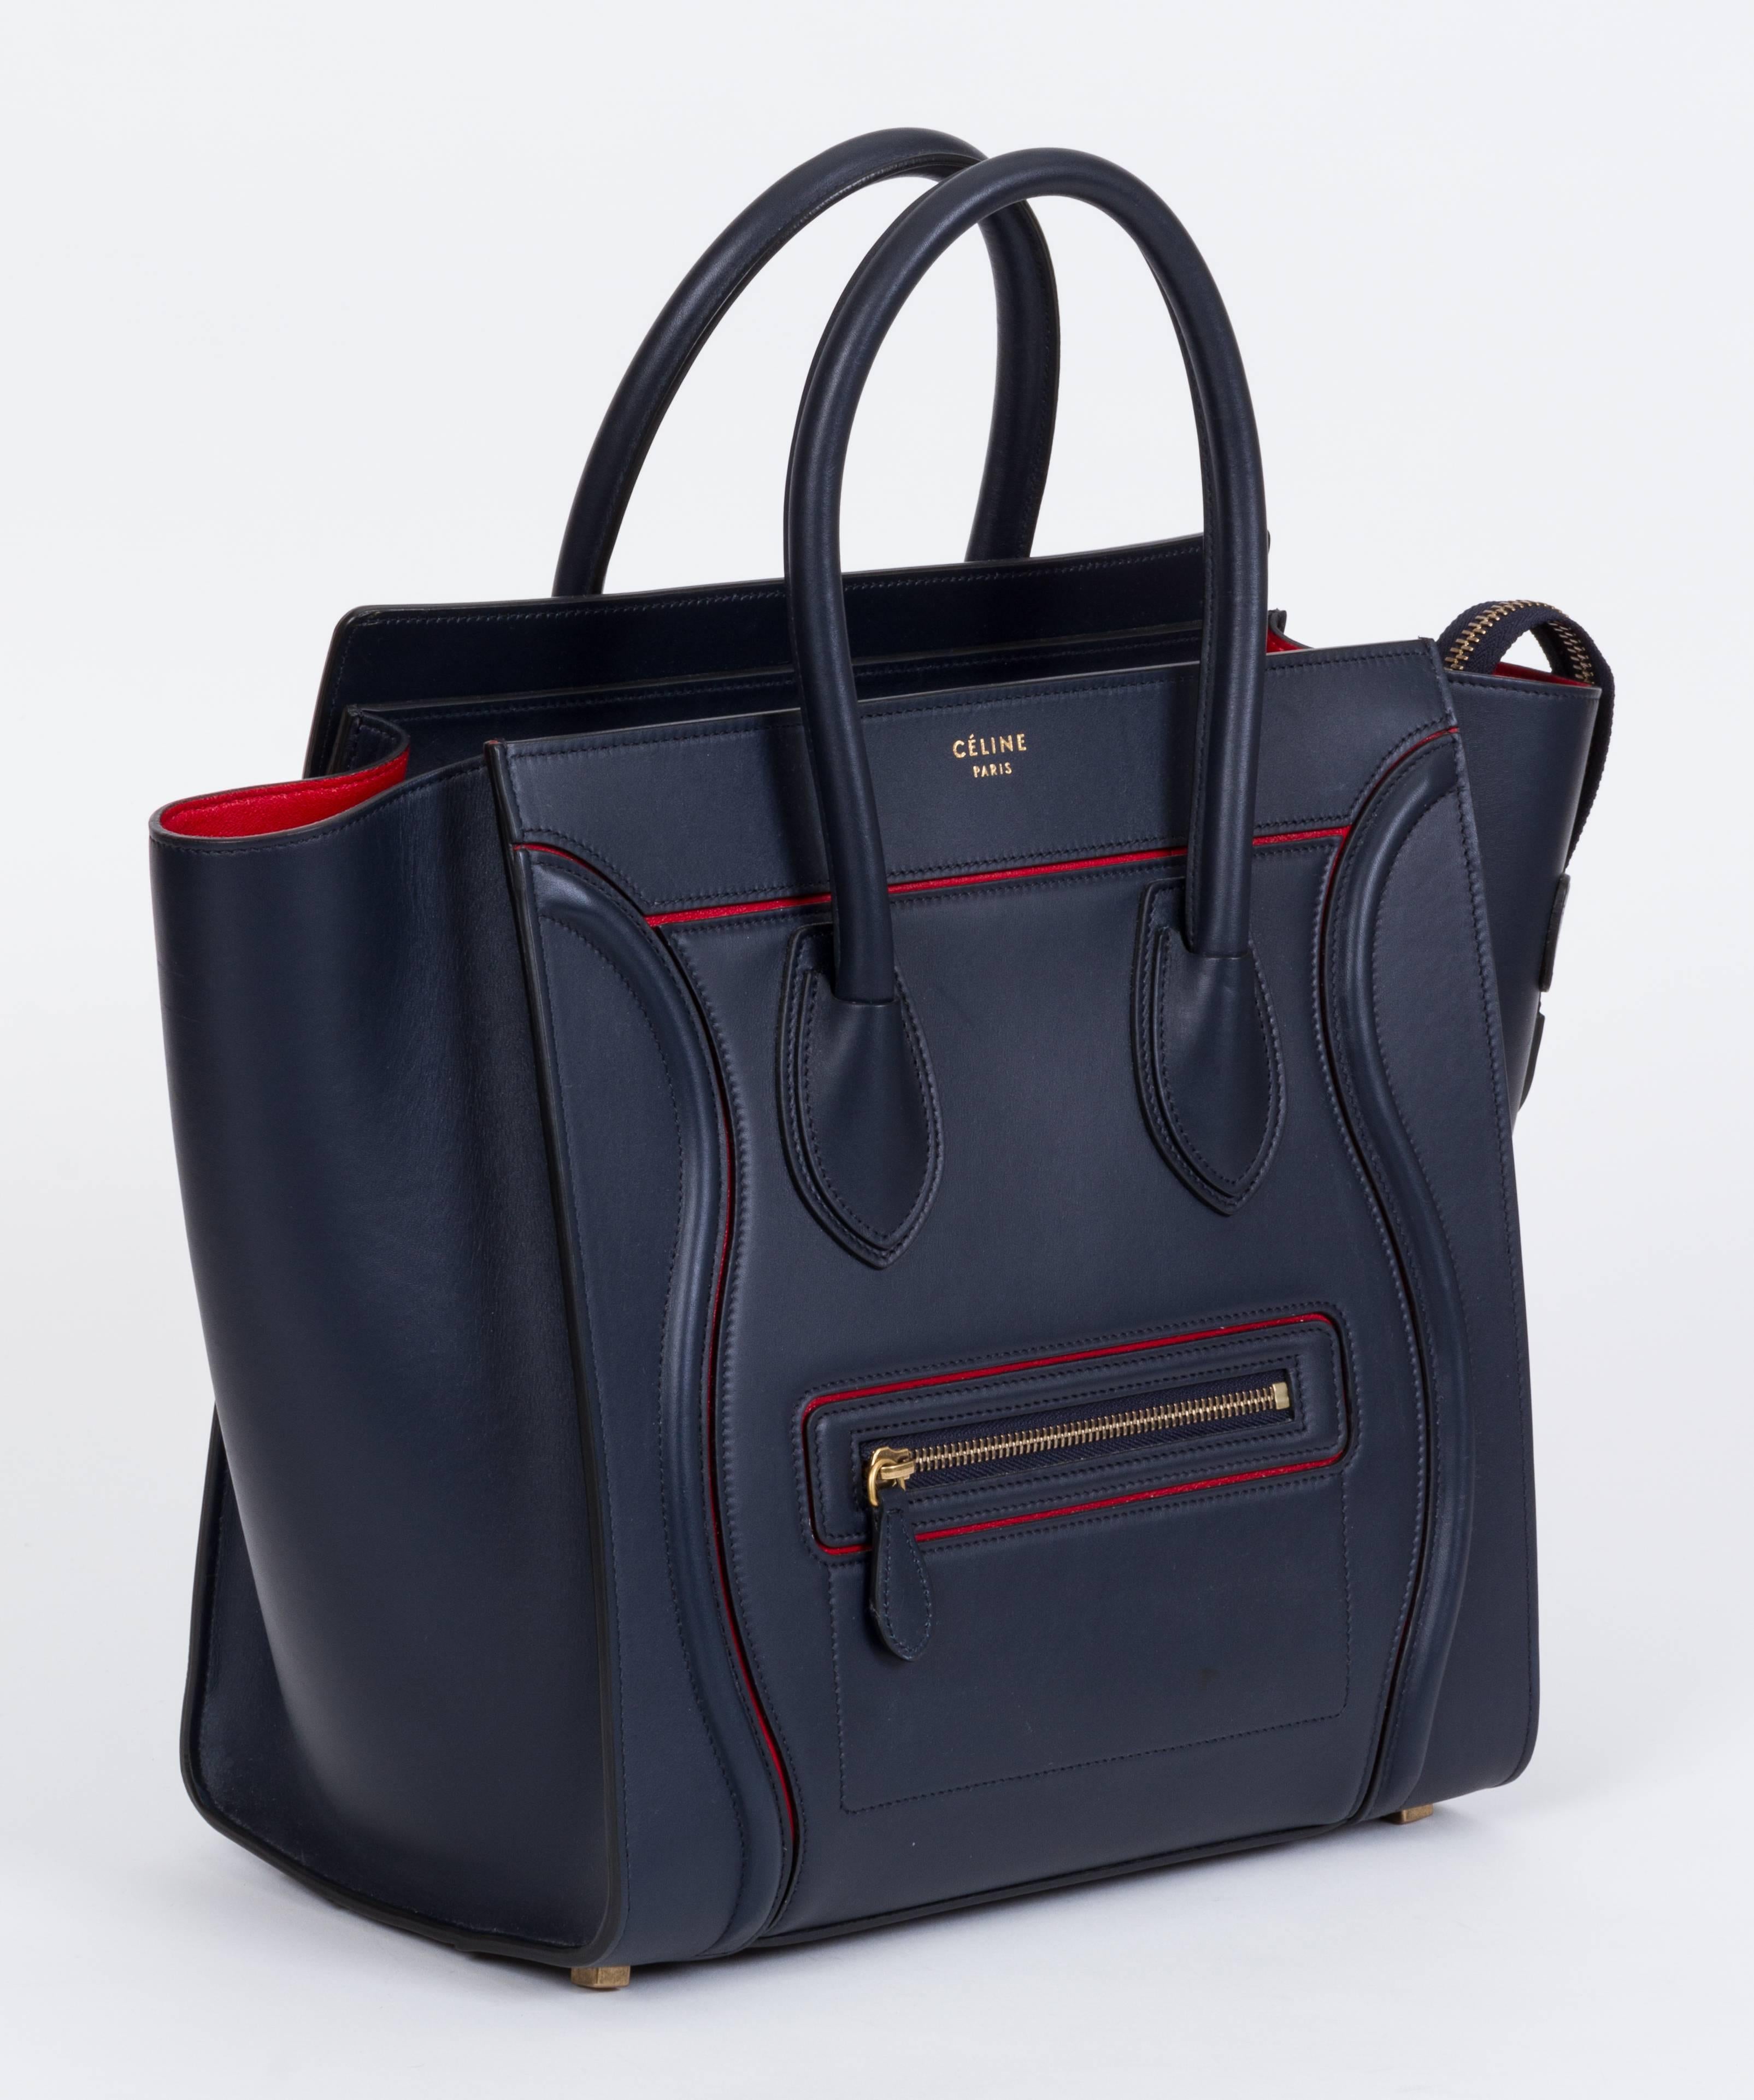 Celine Paris limited edition mini luggage bag. Navy blue leather and red Carmen interior. Collection 2015/2016. Made in Italy by one artisan, 25 pieces of leather stitched together. Interior zipped compartment, two interior pouches, outside zipped